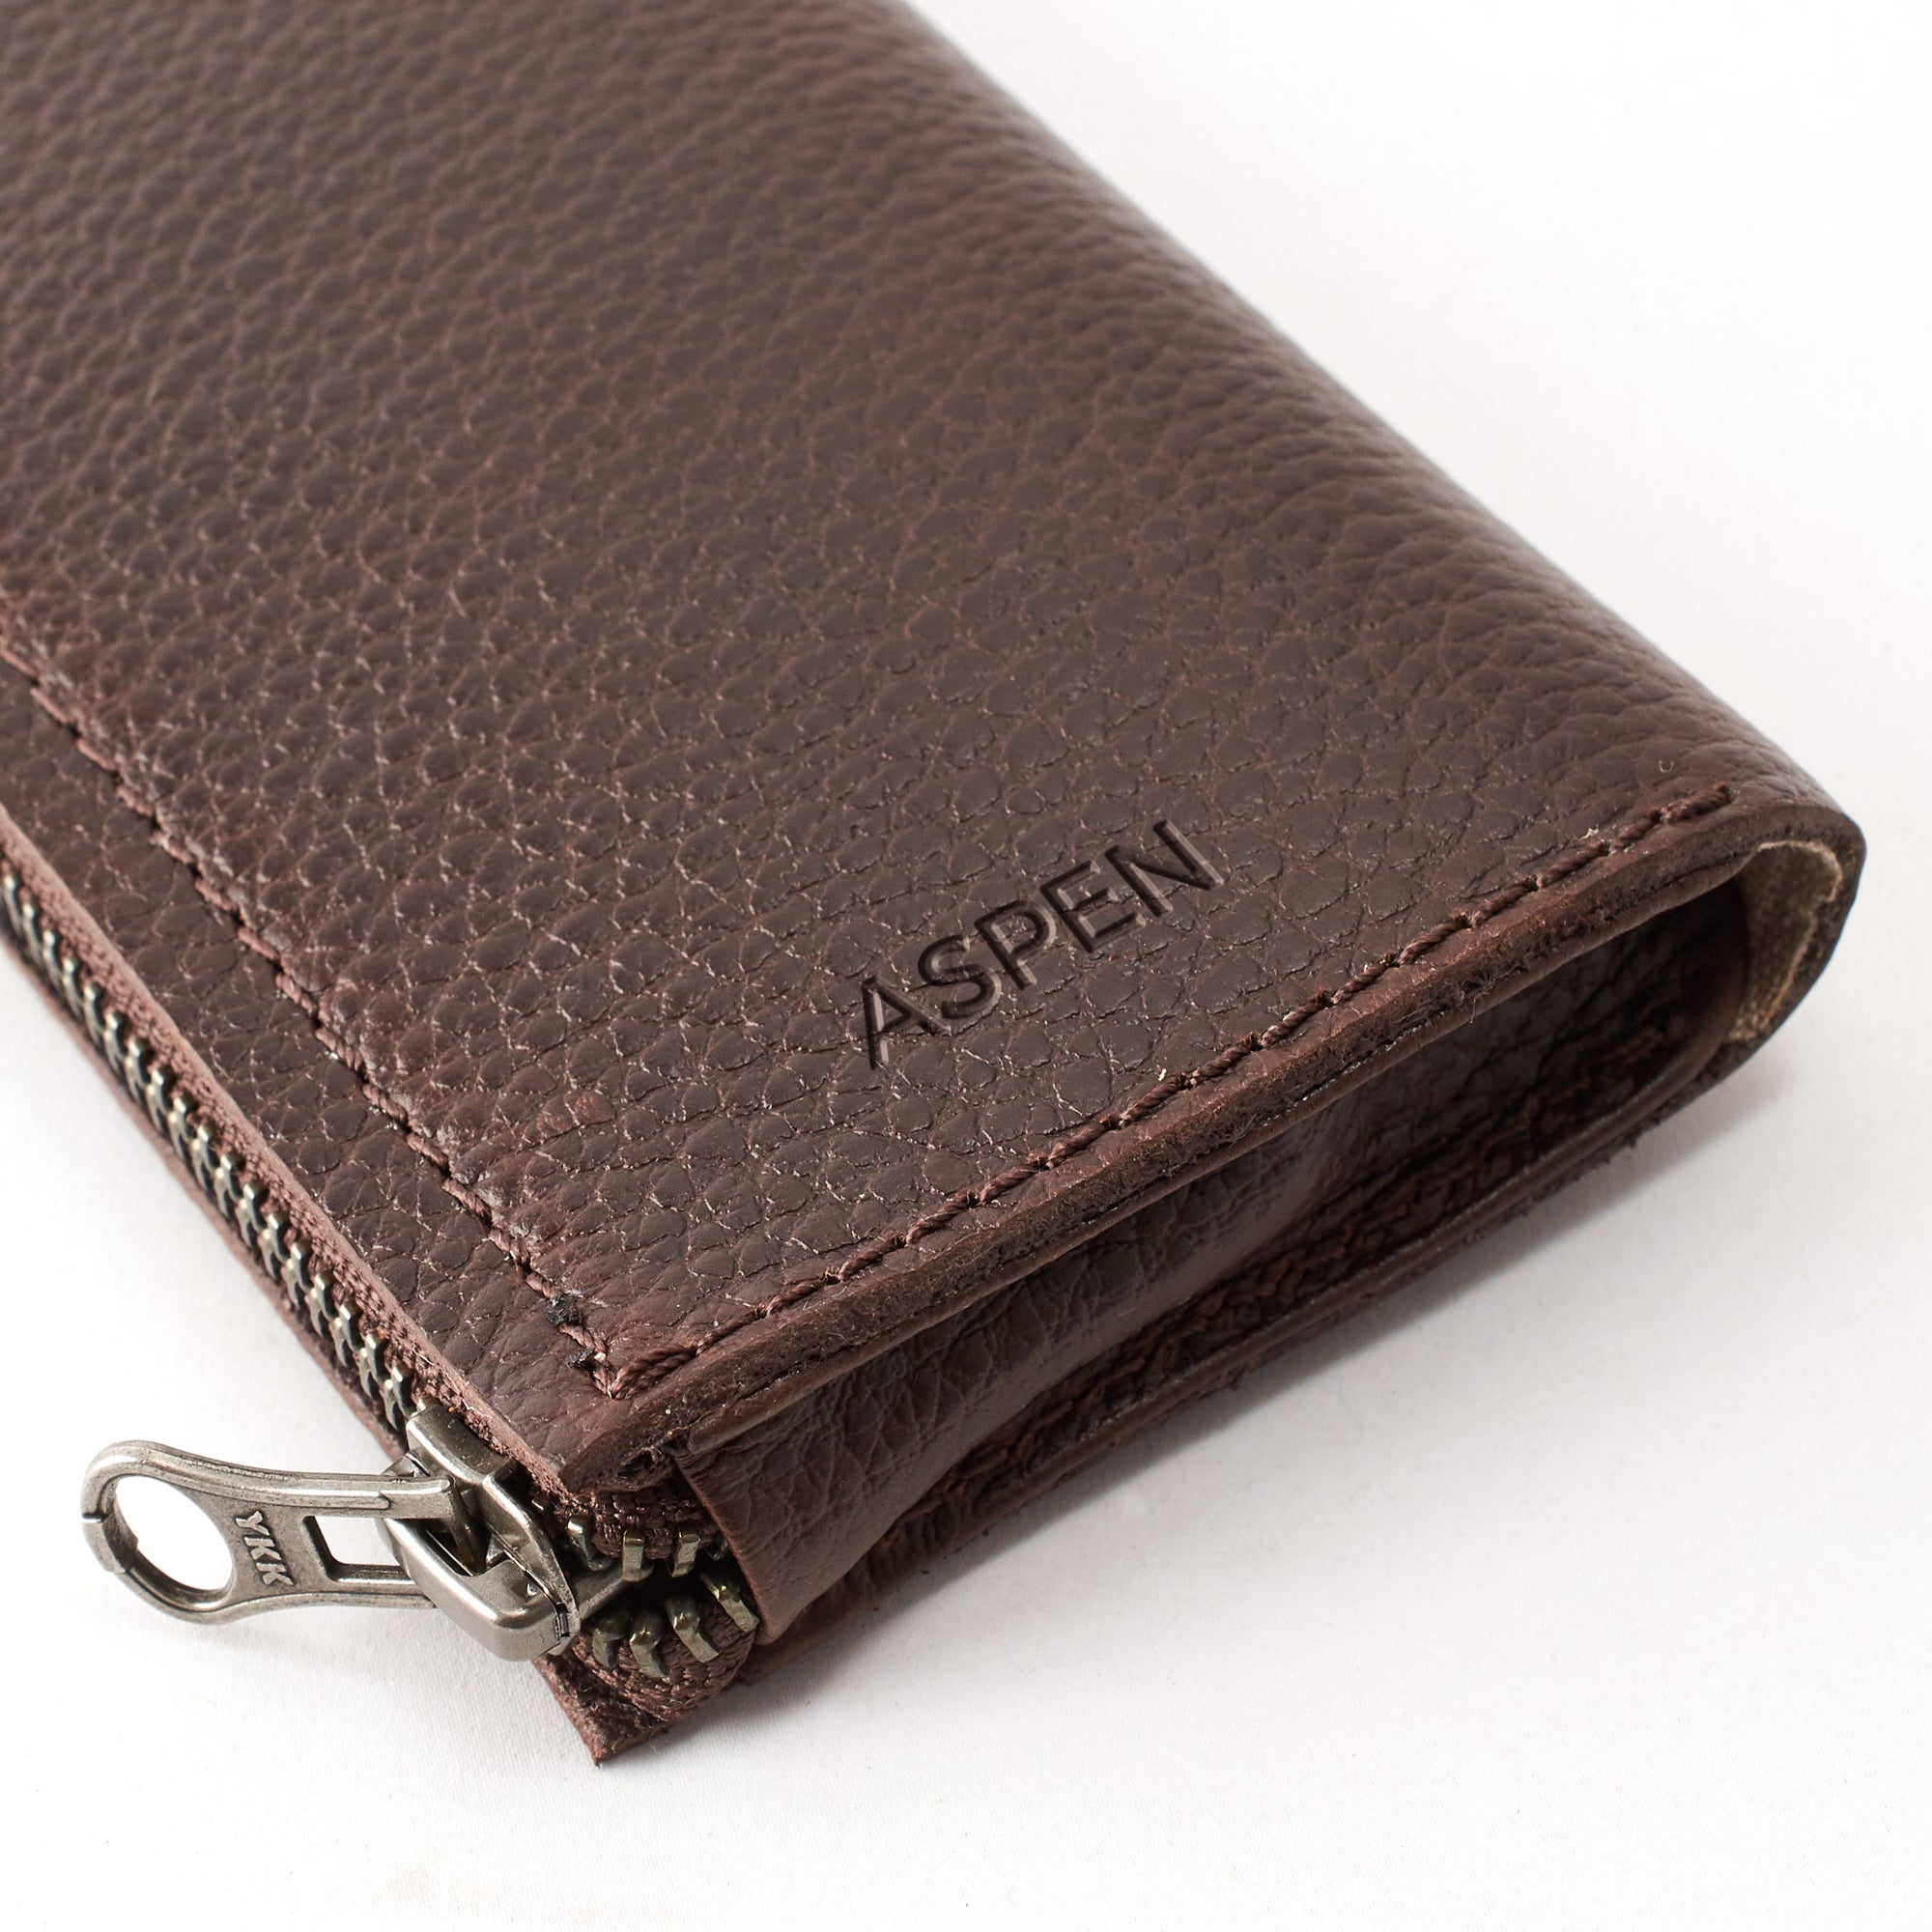 Custom Engraving. Dark brown leather Glasses case, sunglasses case, hand stitched leather sleeve for reading glasses